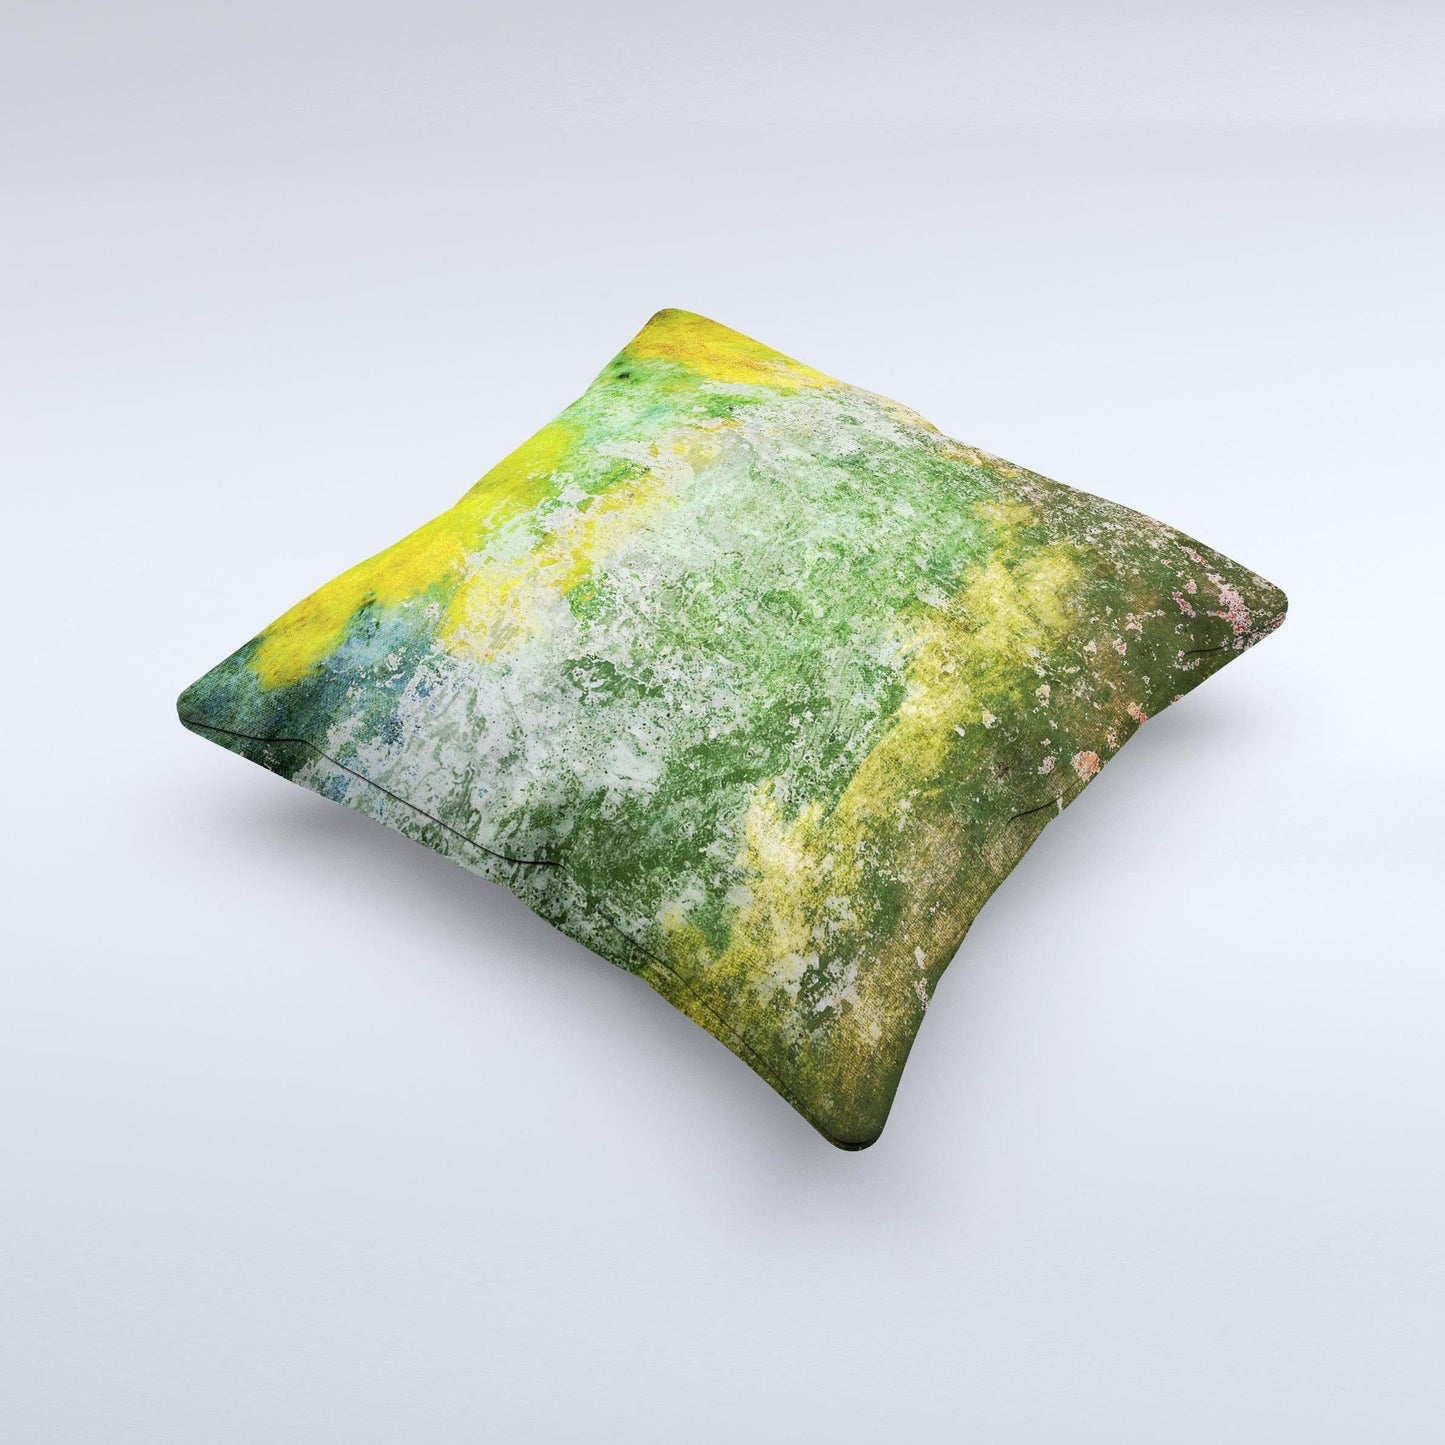 Grunge Green & Yellow Surface Ink-Fuzed Decorative Throw Pillow